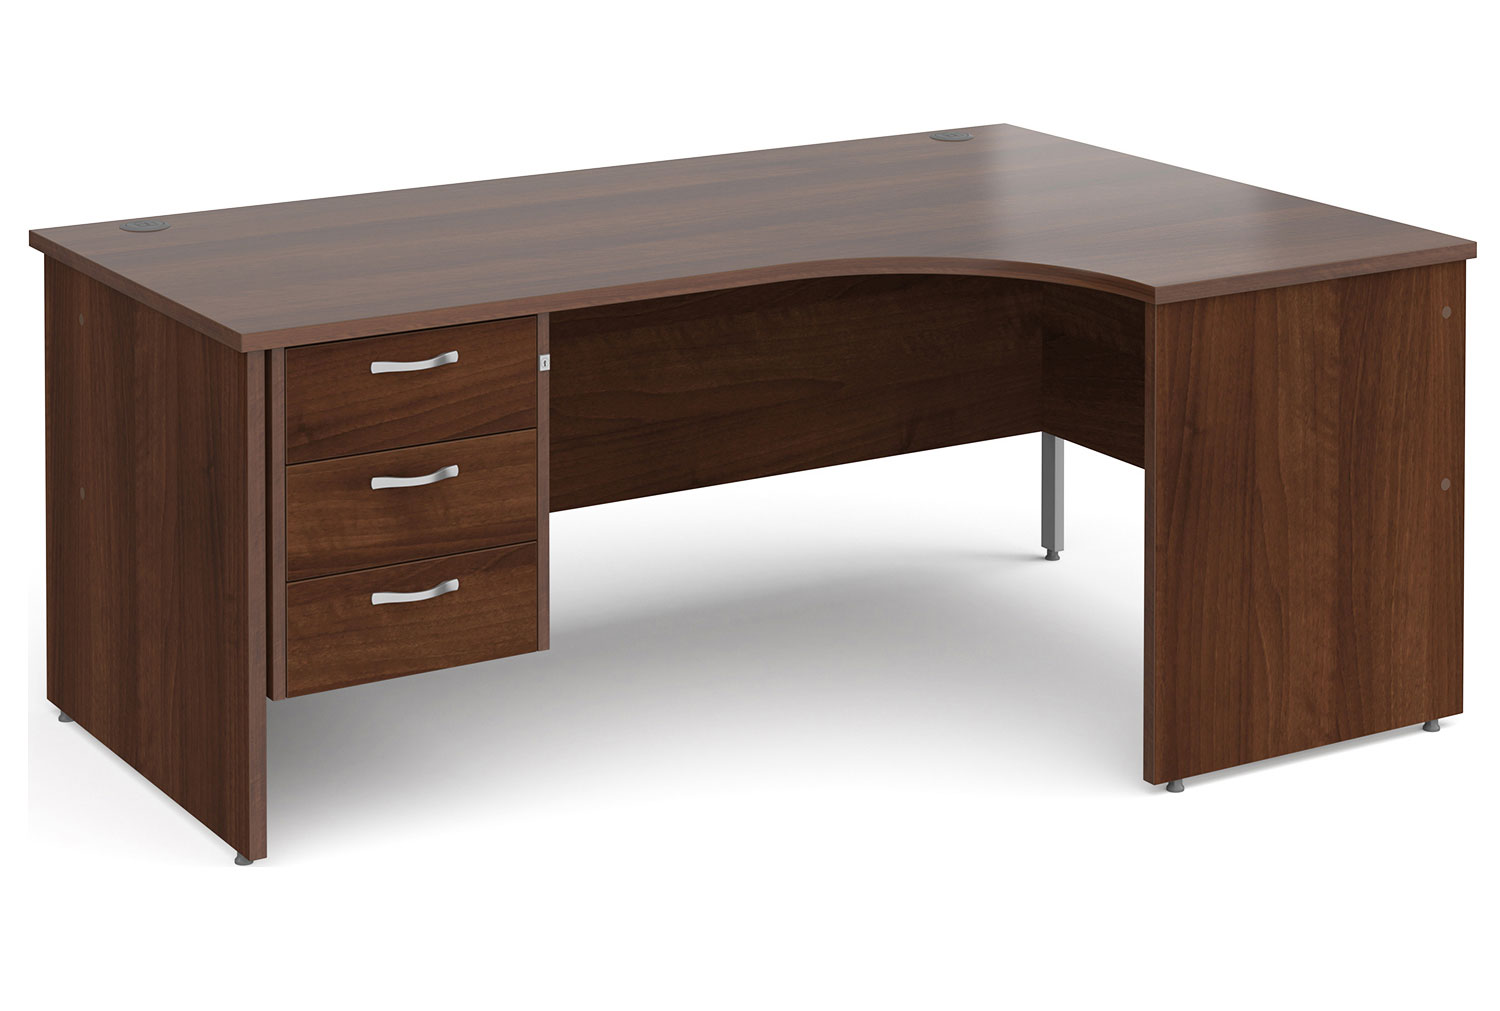 All Walnut Panel End Right Hand Ergo Office Desk 3 Drawers, 180wx120/80dx73h (cm), Fully Installed